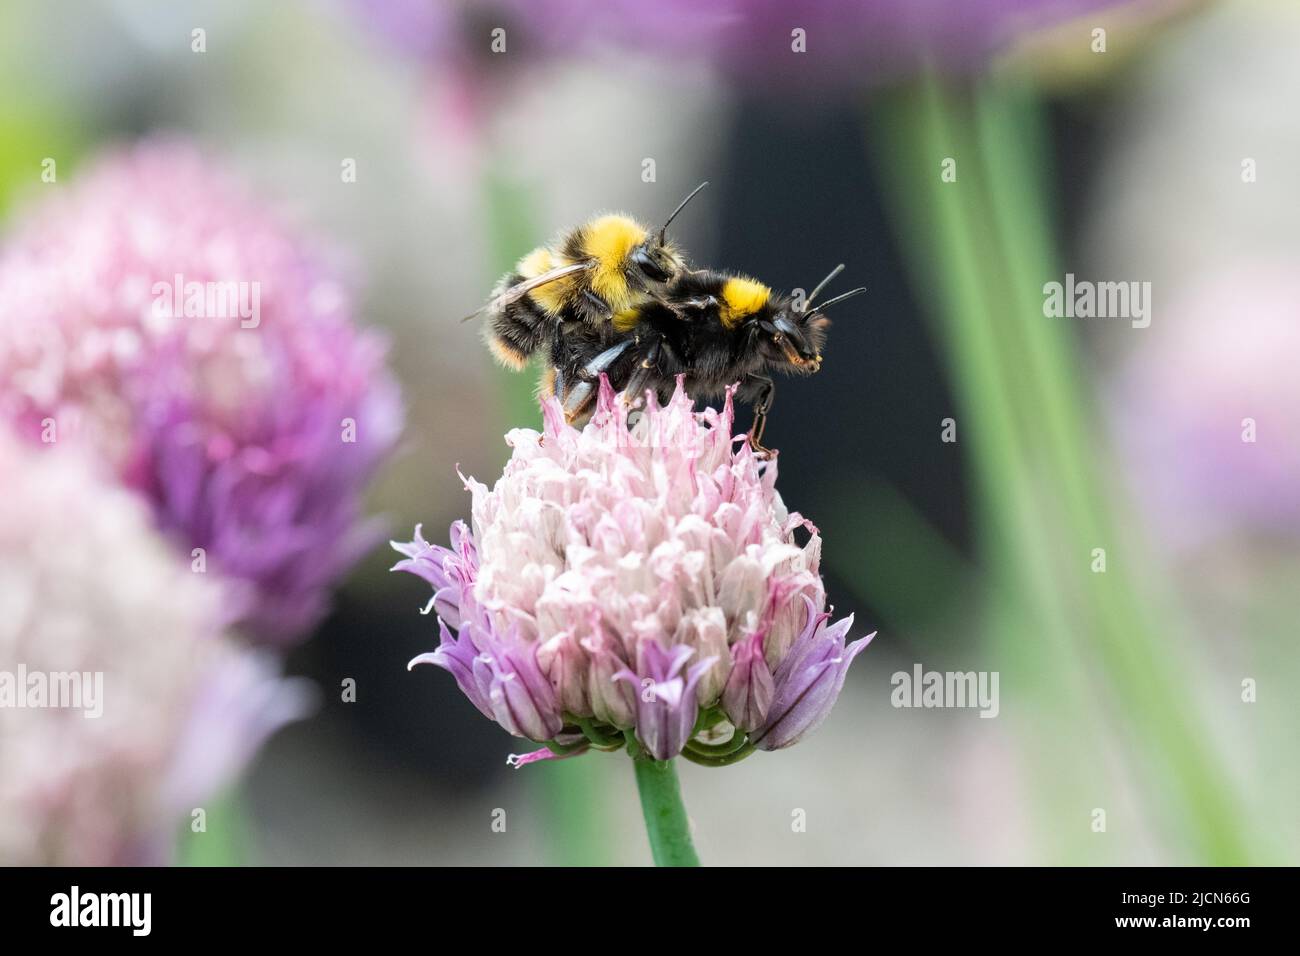 Bumblebees mating - bombus partorum (early bumblebees) mating on chive flower - UK Stock Photo